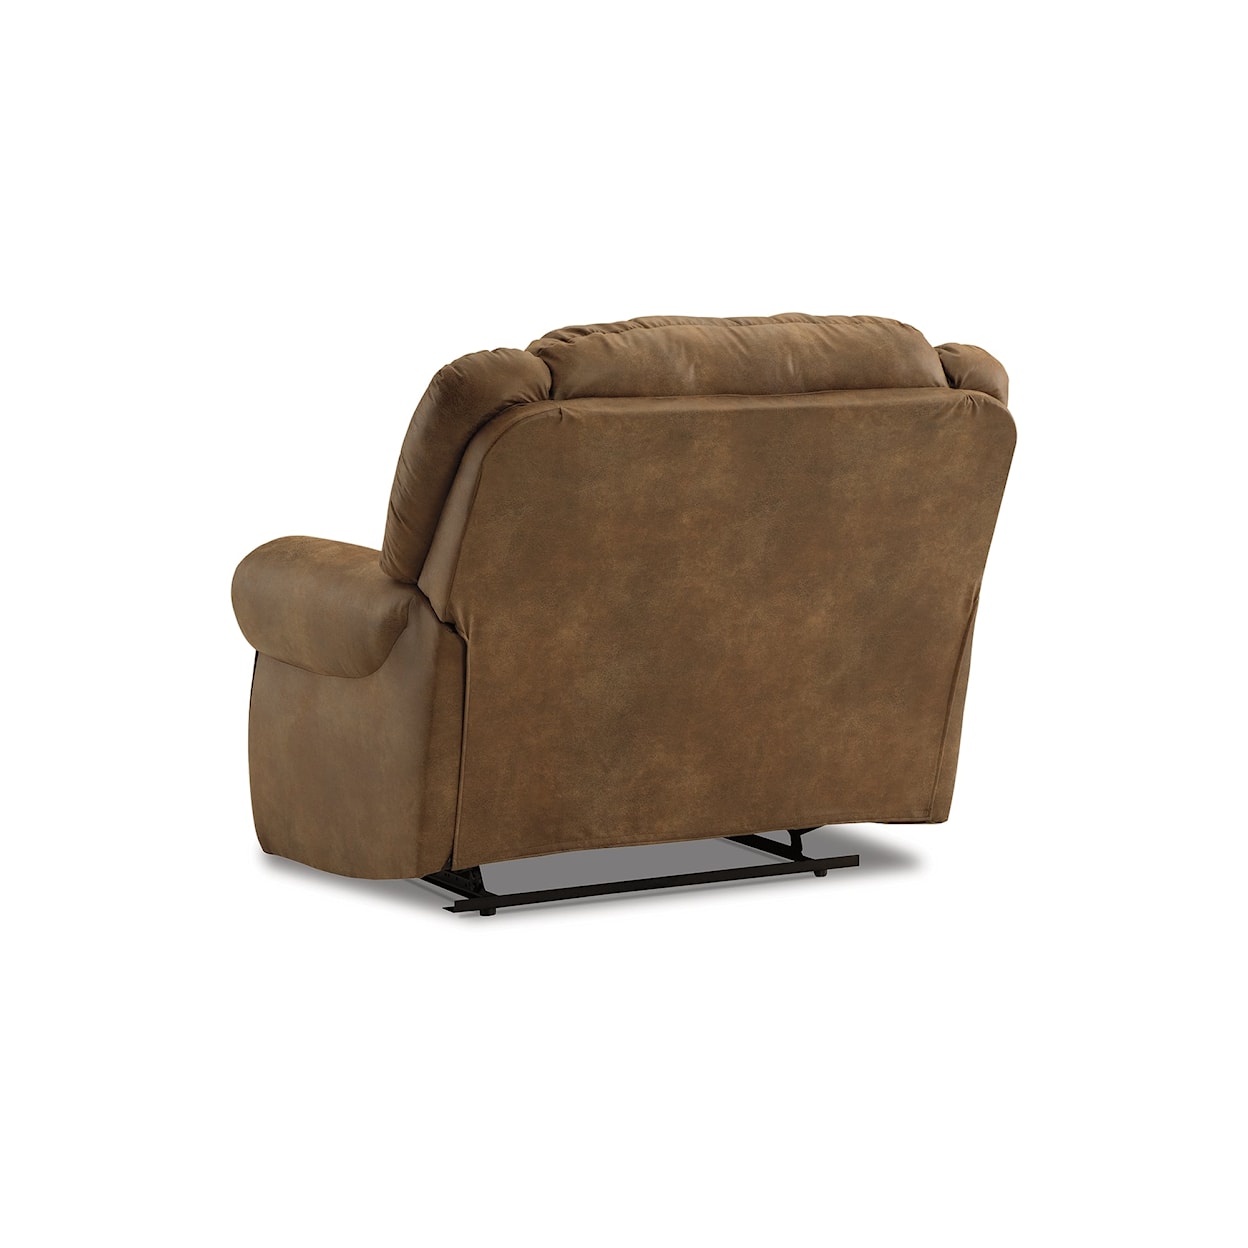 Michael Alan Select Boothbay Wide Seat Power Recliner